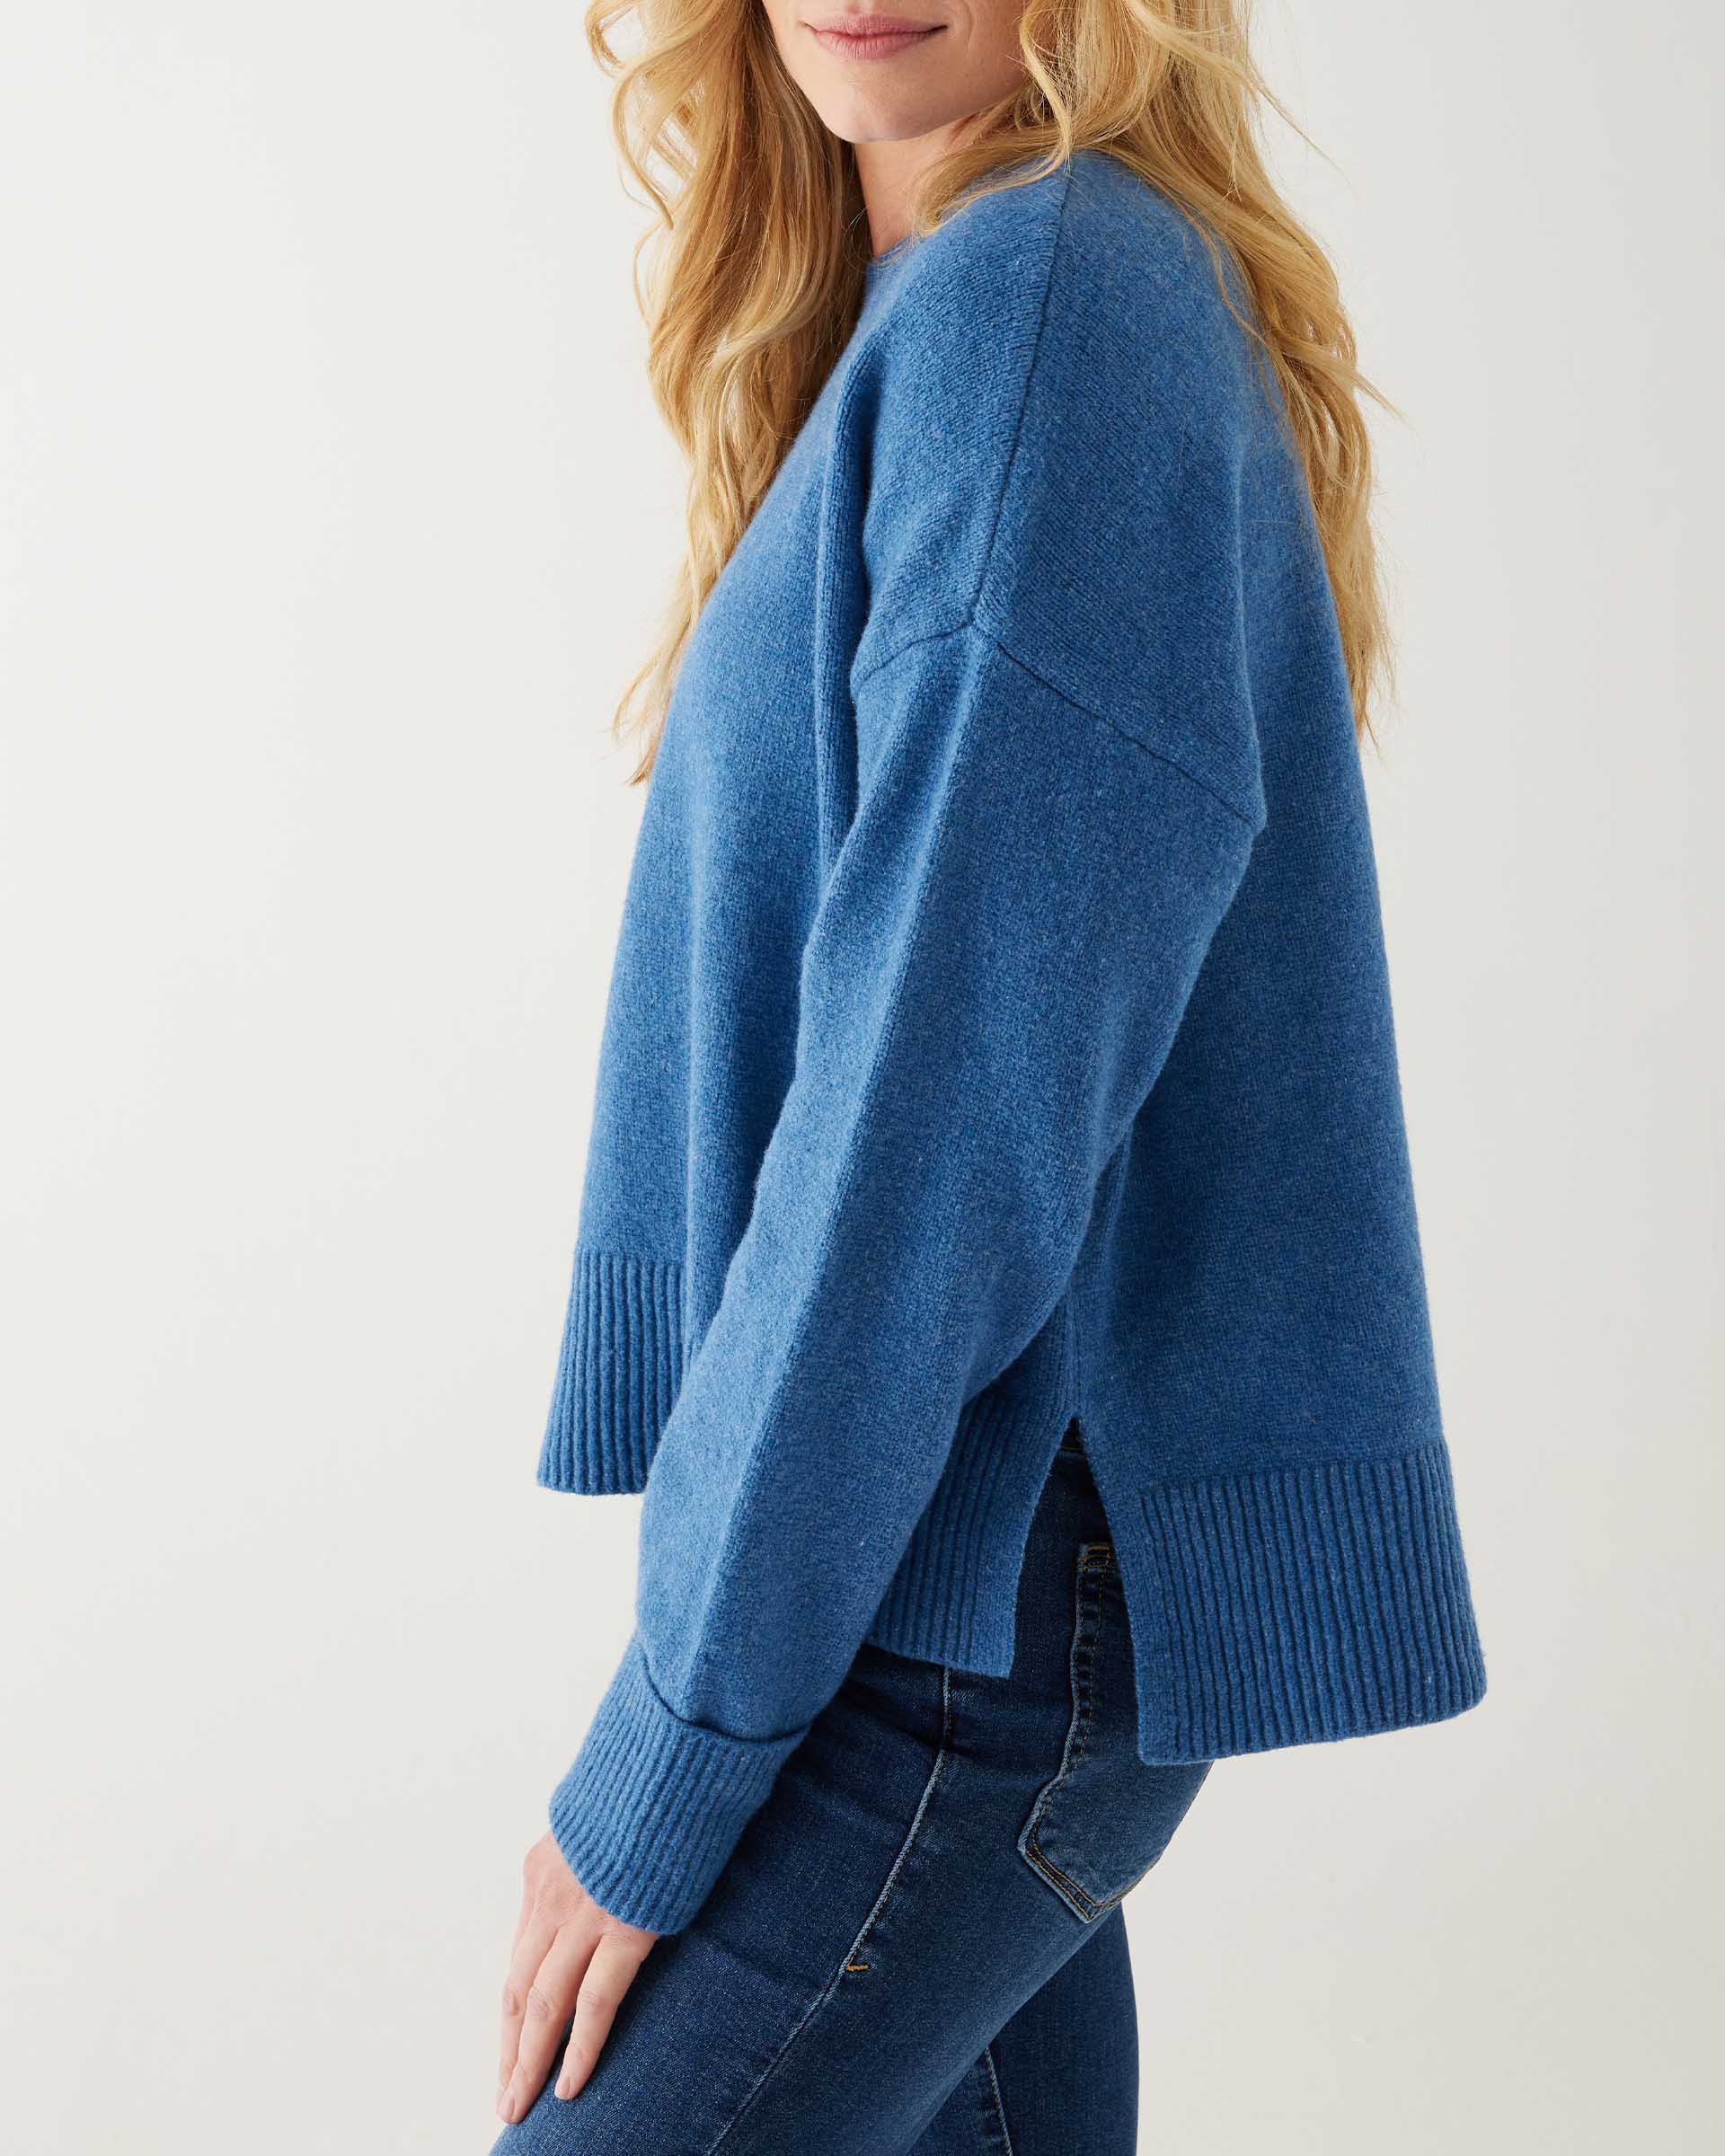 profile of female wearing denim blue crewneck sweater standing in front of a white background